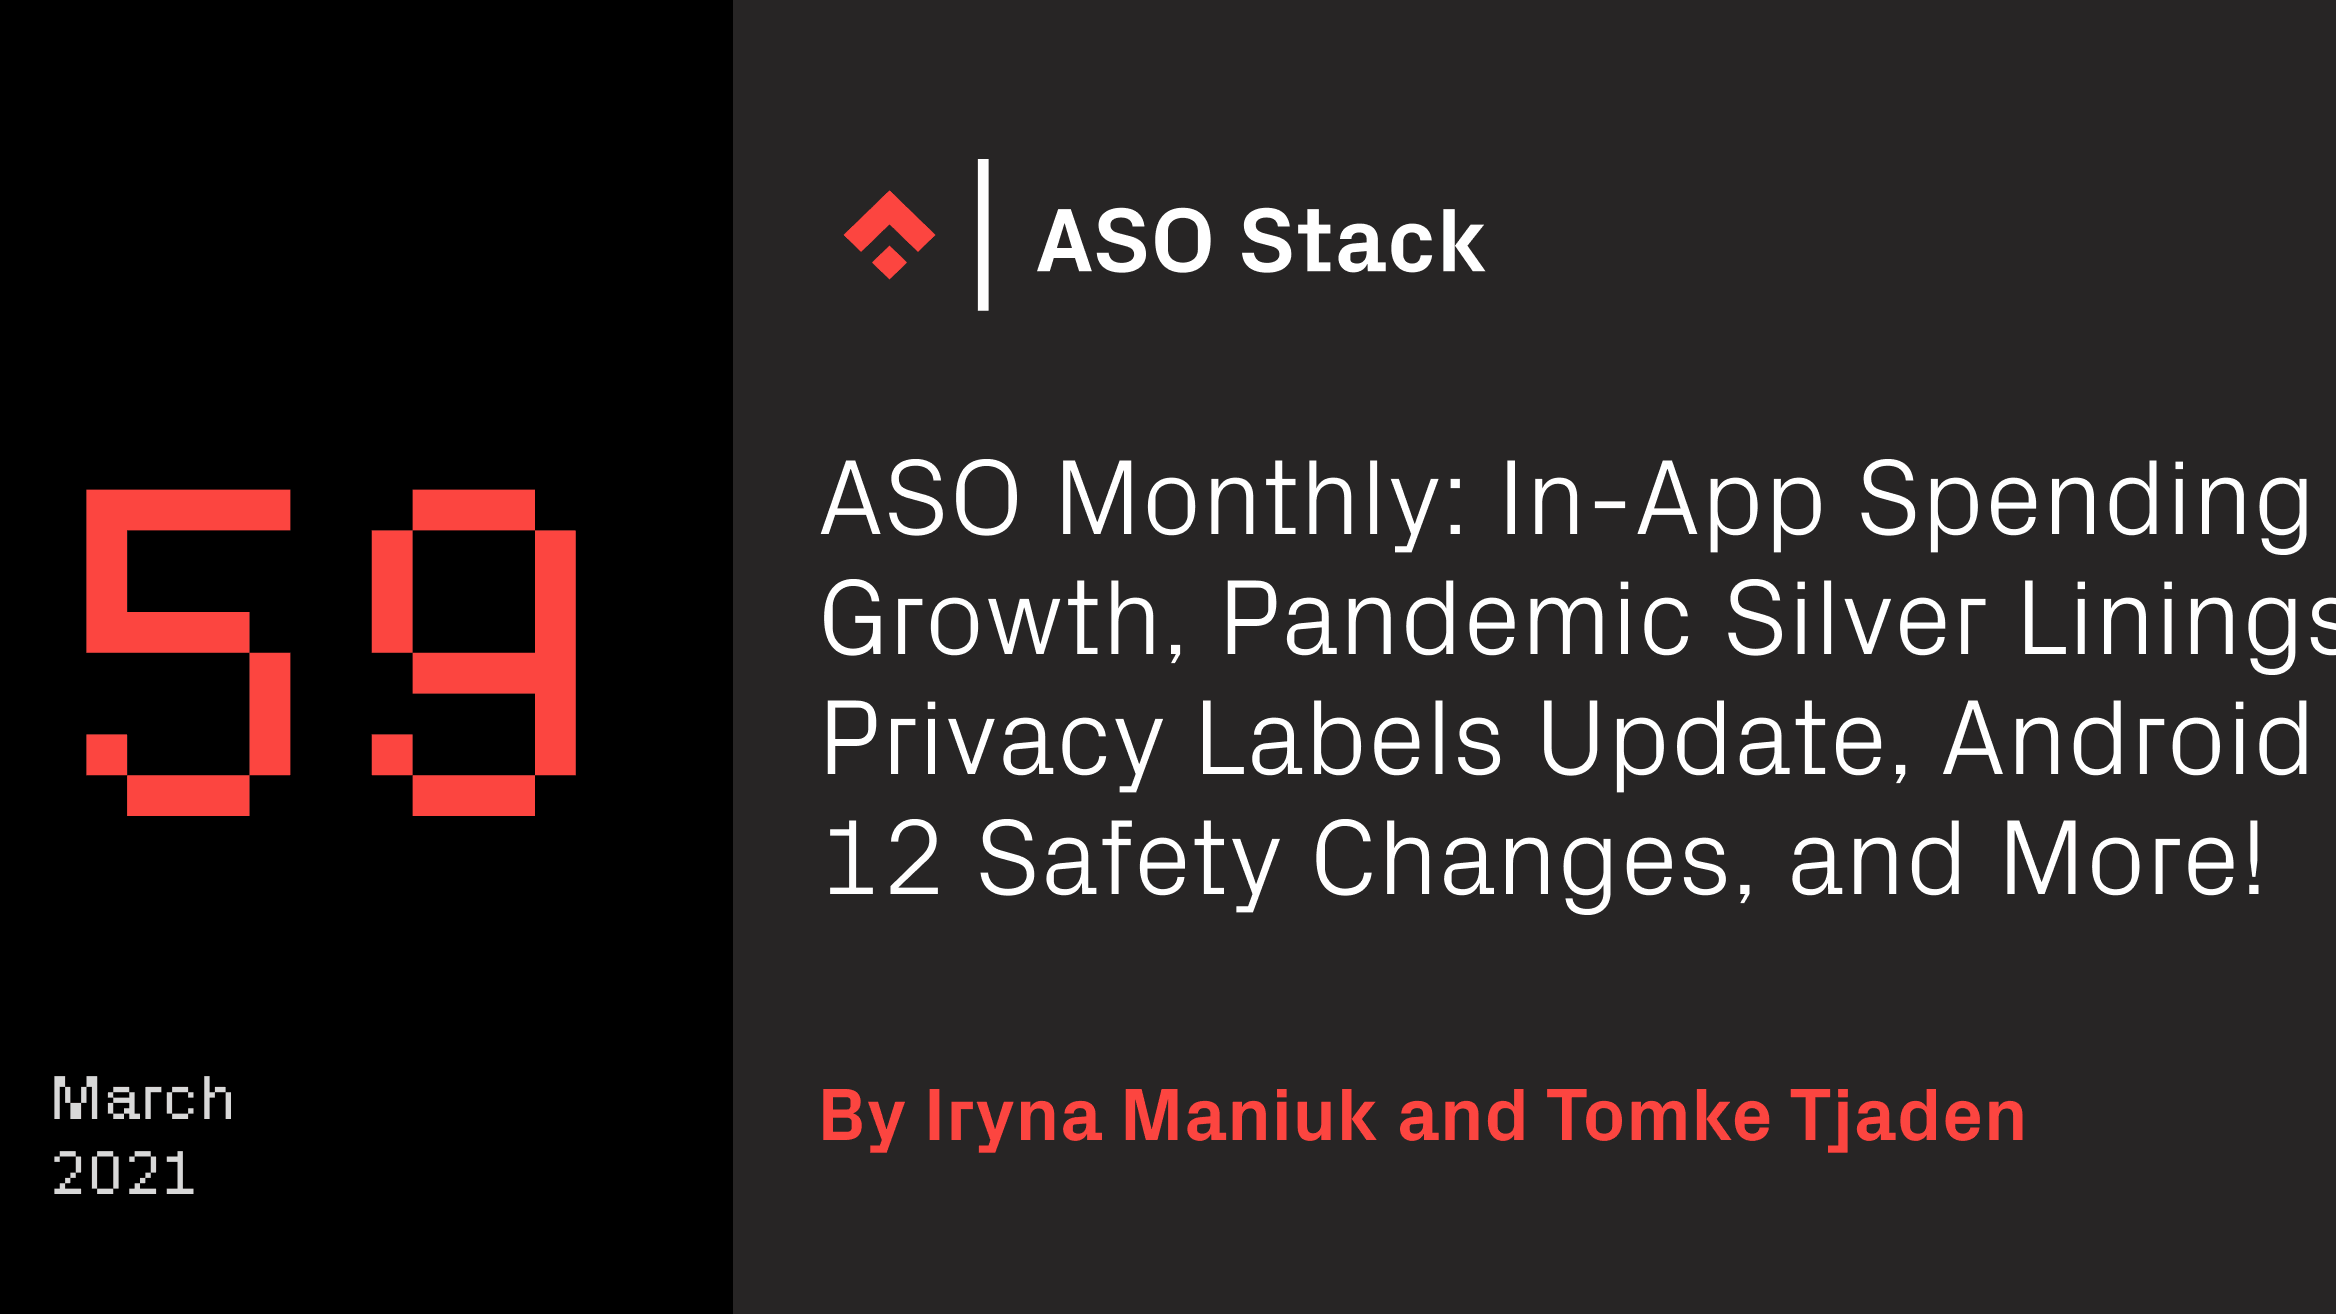 ASO Monthly #59 March 2021: In-App Spending Growth, Pandemic Silver Linings, Privacy Labels Update, Android 12 Safety Changes, and More!